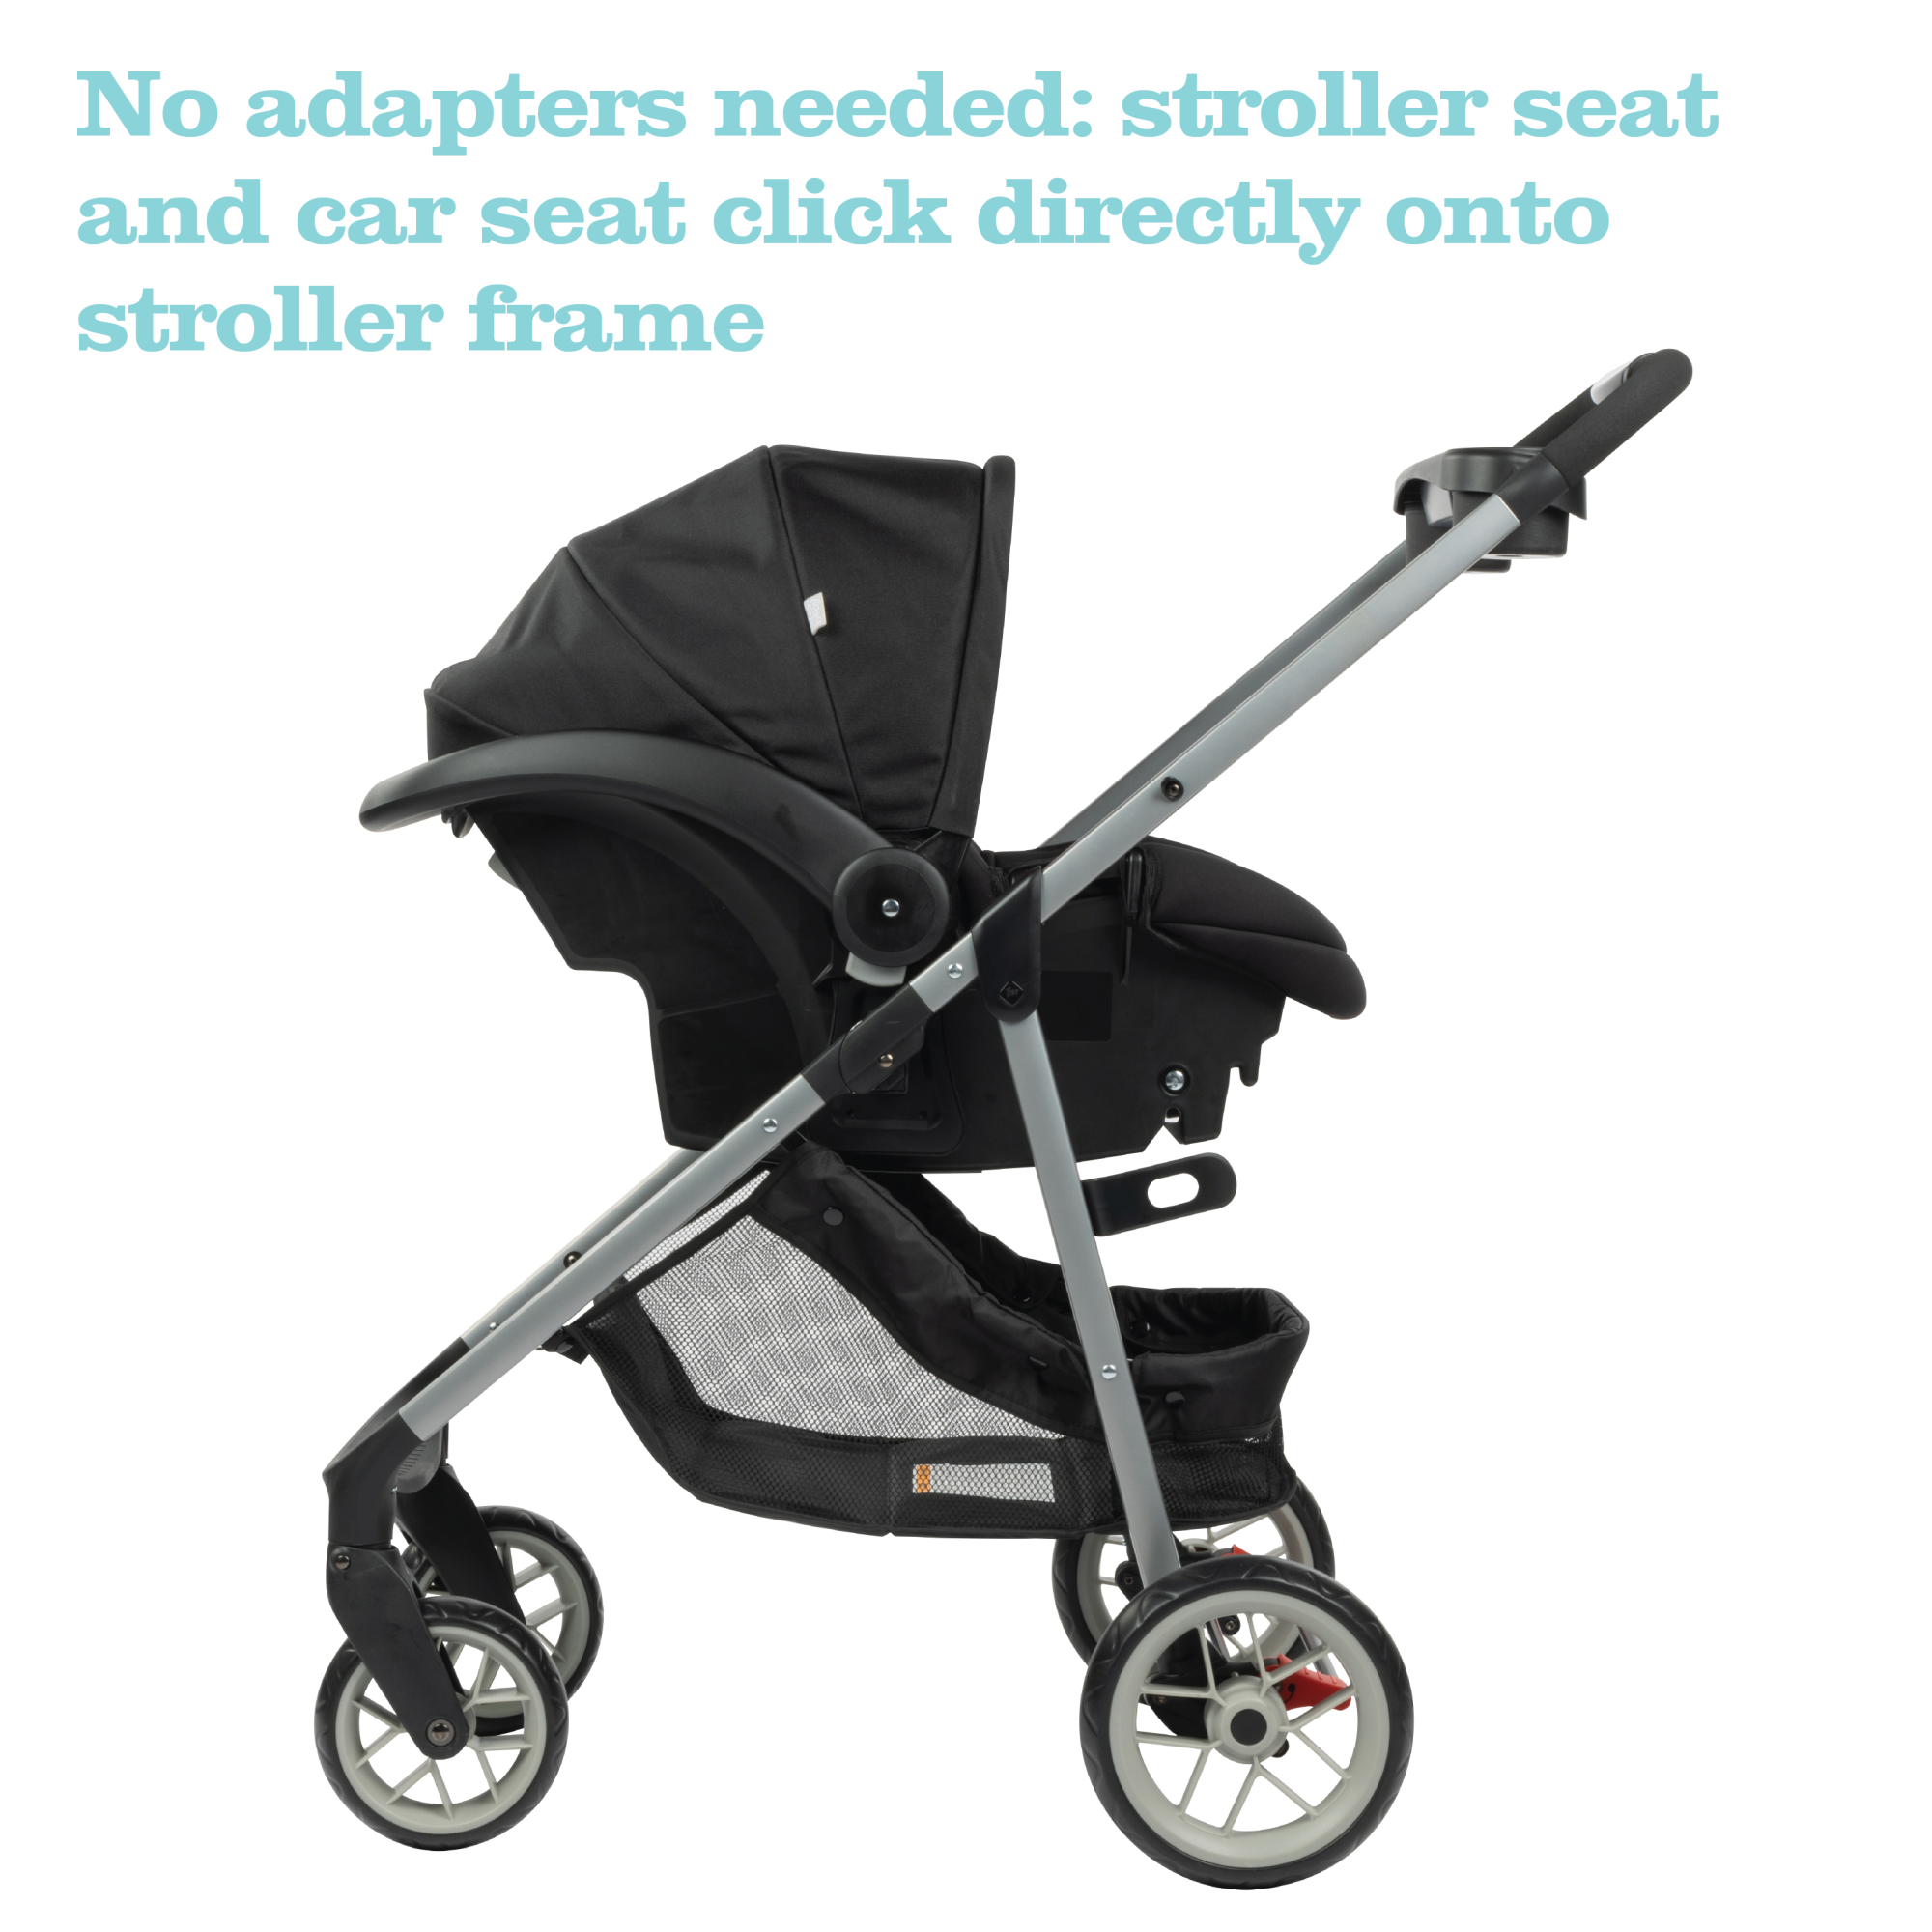 Disney Baby Grow and Go™ Modular Travel System - no adapters needed: stroller seat and car seat click directly onto stroller frame